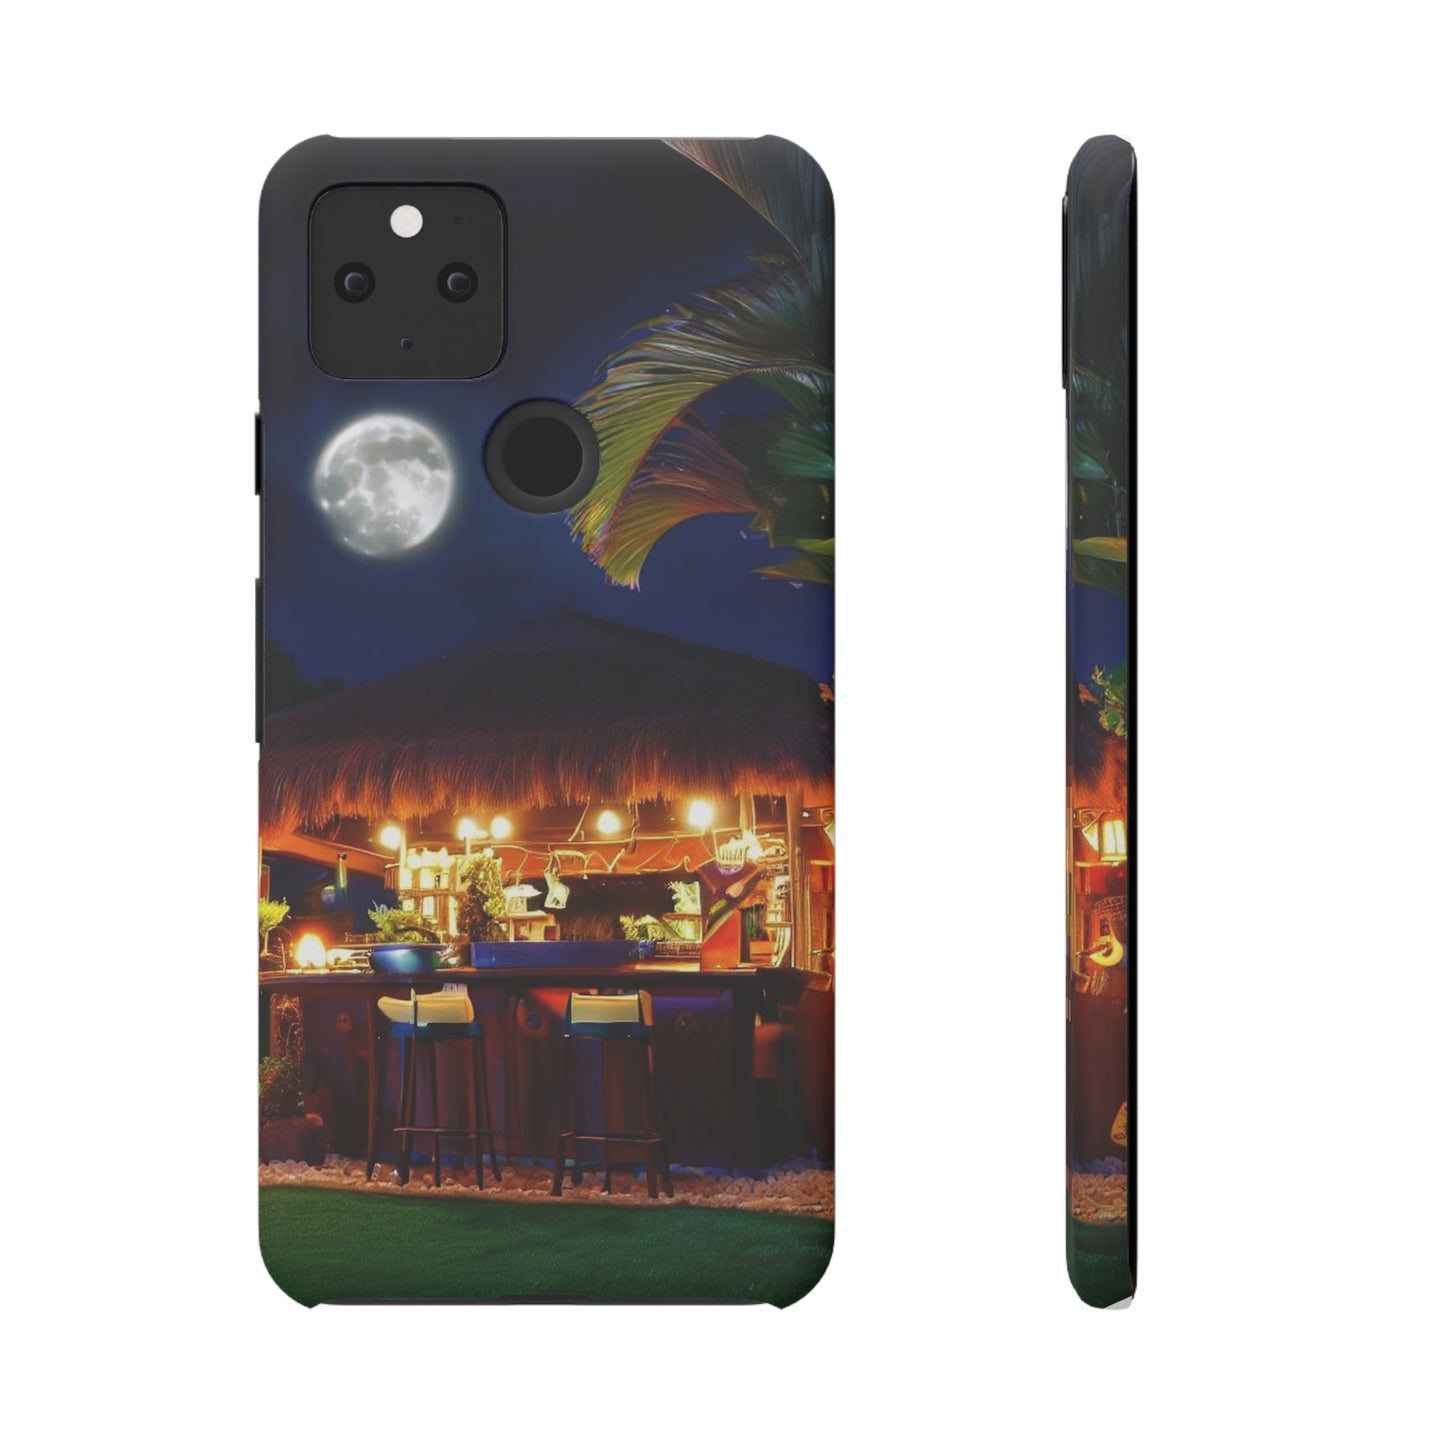 Tiki Phone Case for Android and Iphone